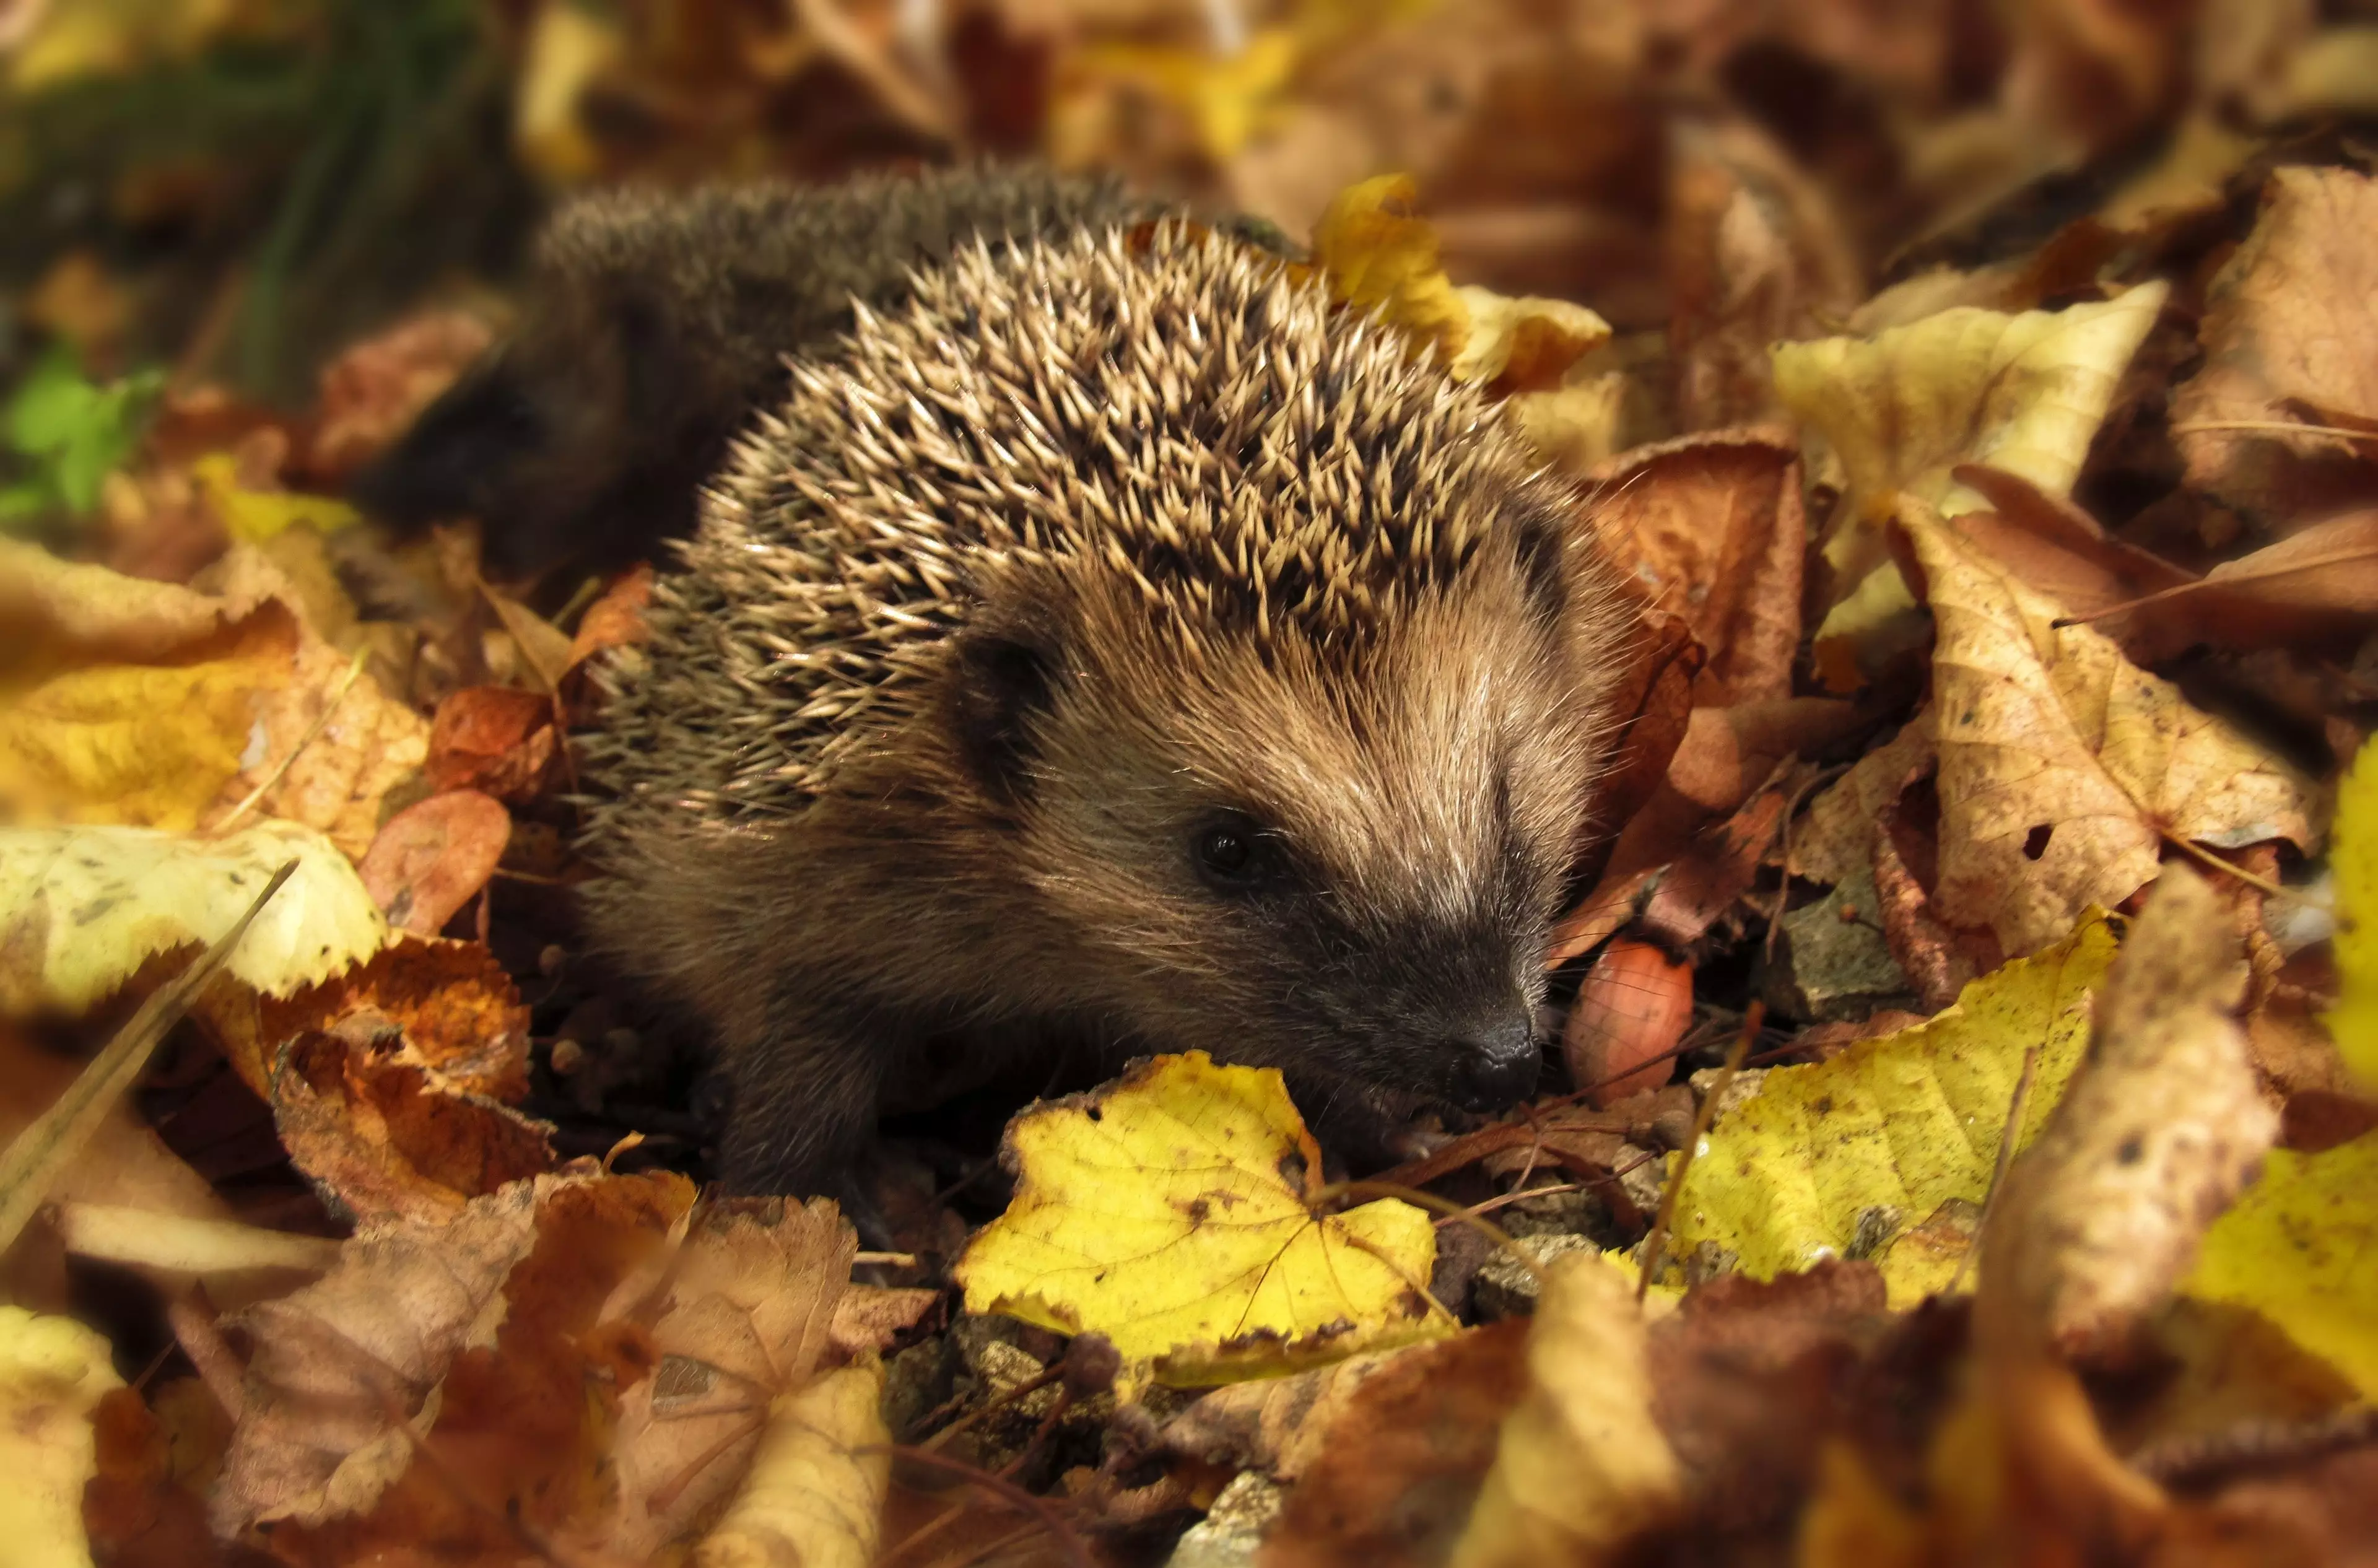 We must save the hedgehogs (